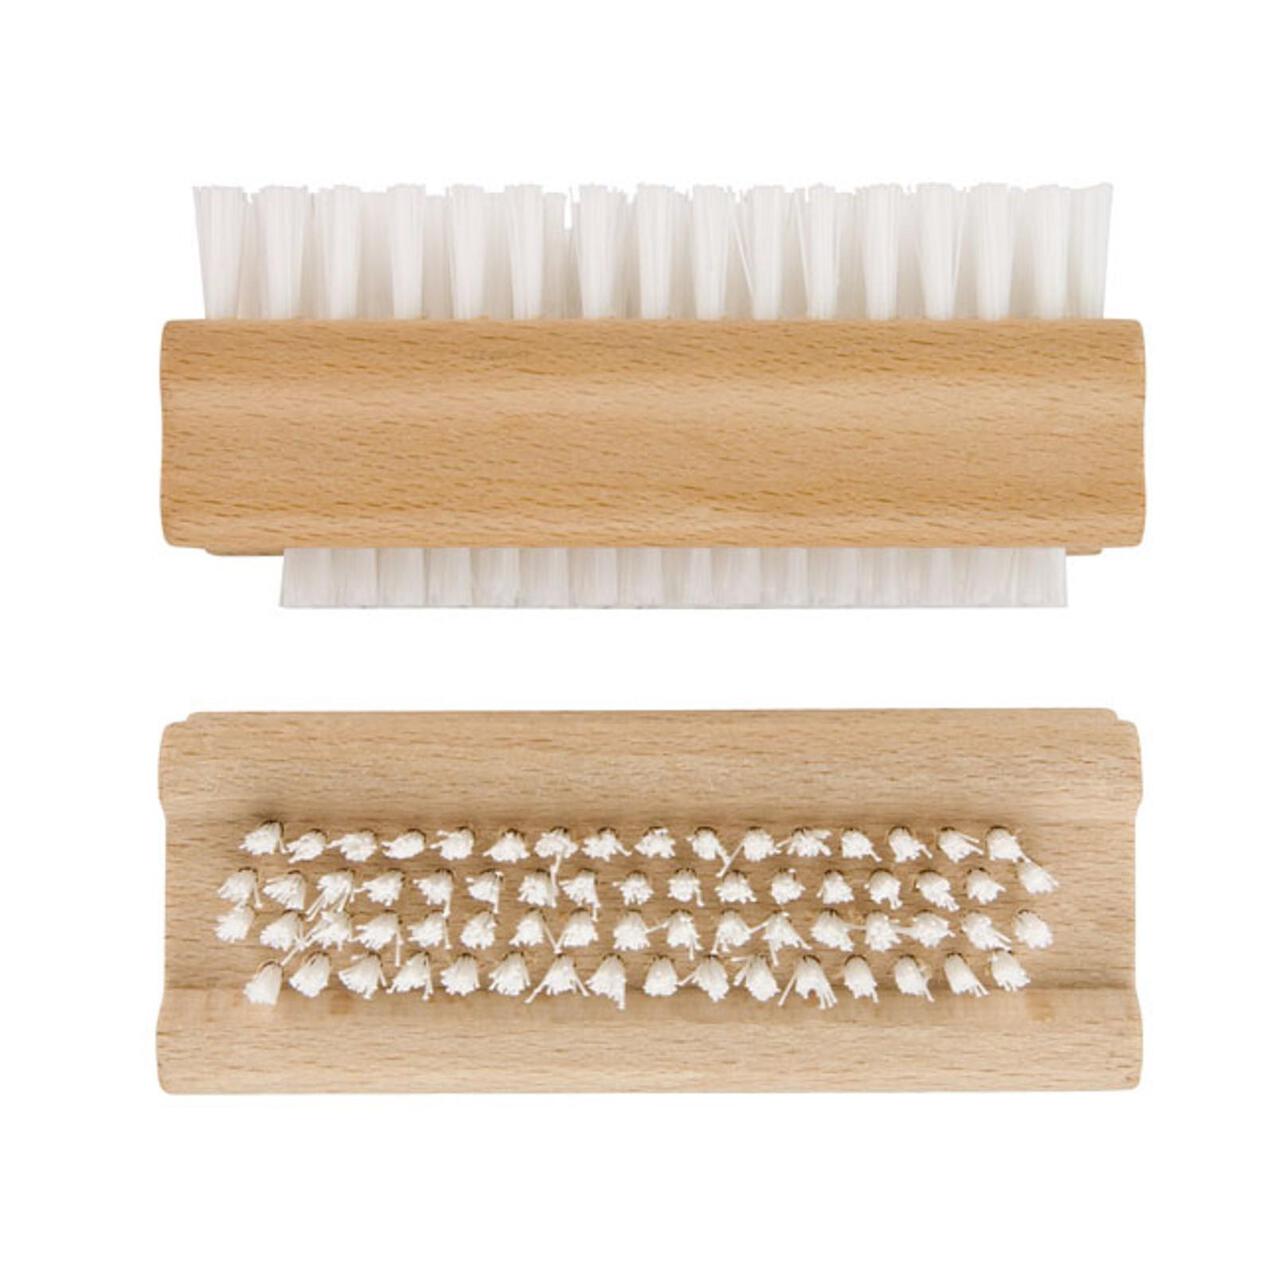 Naturals Double-Sided Wooden Brush